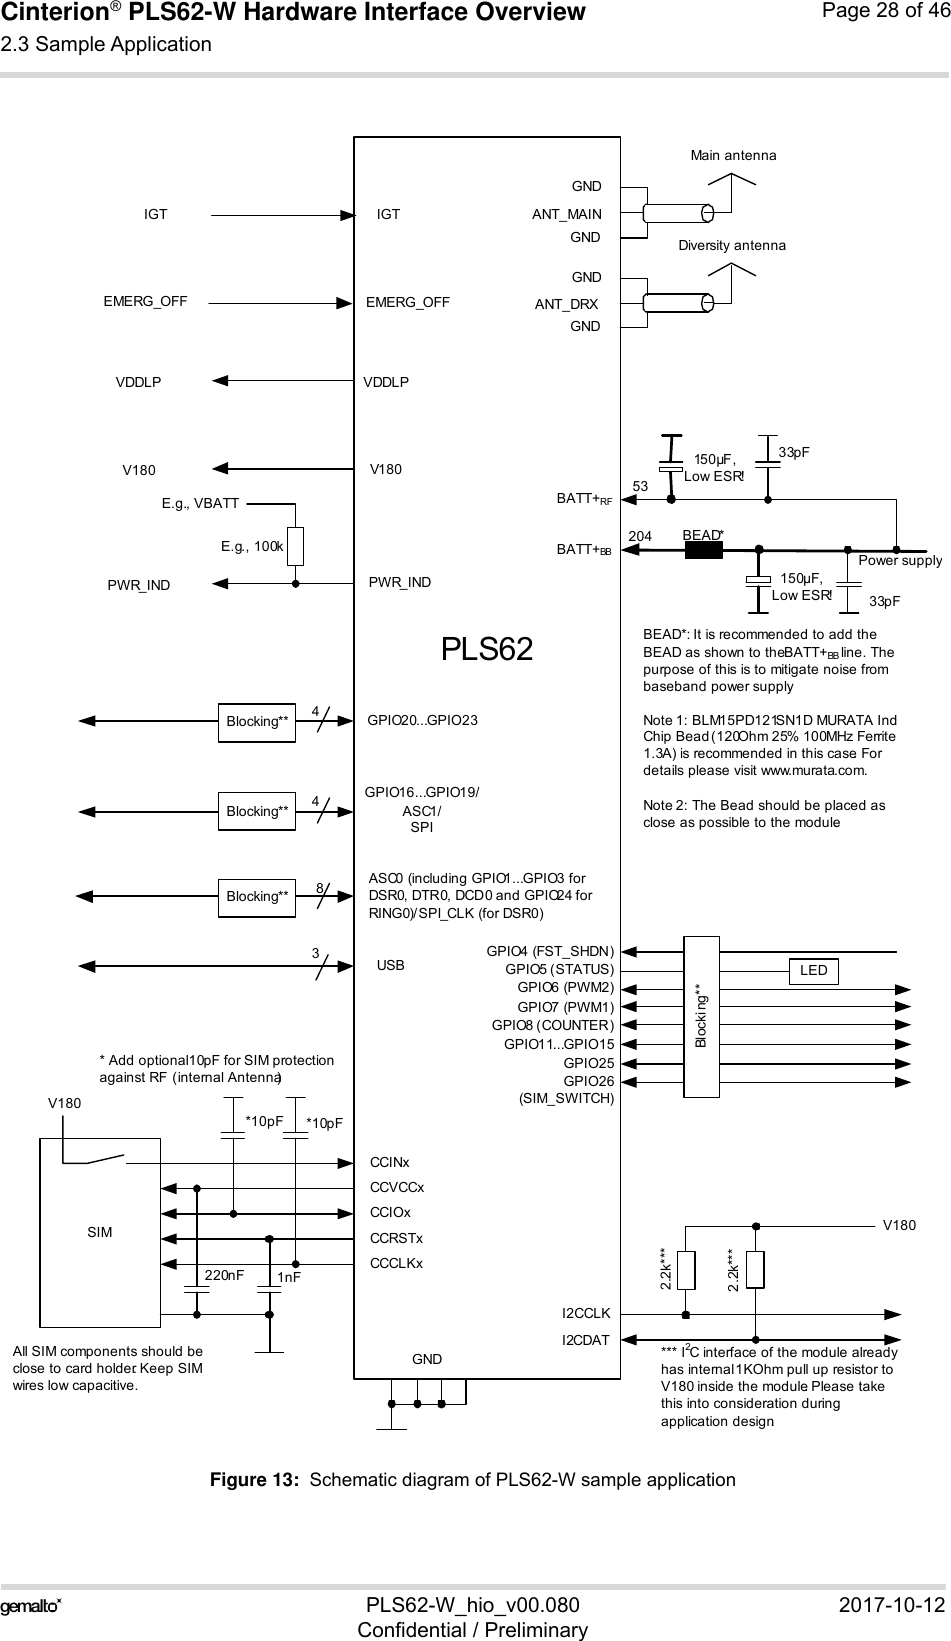 Cinterion® PLS62-W Hardware Interface Overview2.3 Sample Application28PLS62-W_hio_v00.080 2017-10-12Confidential / PreliminaryPage 28 of 46Figure 13:  Schematic diagram of PLS62-W sample applicationPWR_INDV180ASC0 (including GPIO1...GPIO3 for DSR0, DTR0, DCD0 and GPIO24 for RING0)/ SPI_CLK (for DSR0)GPIO16...GPIO19/ASC1/SPI84CCVCCxCCIOxCCCLKxCCINxCCRSTxSIMV180220nF 1nFI2CCLKI2CDAT2.2k***V180GPIO4 (FST_SHDN) GPIO5 (STATUS)GPIO6 (PWM2)GPIO7 (PWM1)GPIO8 (COUNTER)GPIO11...GPIO15GPIO25GPIO26 (SIM_SWITCH)LEDGNDGNDGNDANT_MAINBATT+RFPower supplyMain antennaPLS62All SIM components should be close to card holder. Keep SIM wires low capacitive.*10pF *10pF* Add optional 10pF for SIM protection against RF  (internal Antenna)150µF,Low ESR! 33pFBl ocki ng **Blocking**Blocking**PWR_INDBATT+BB53204GPIO20...GPIO234Blocking**2.2k***3USB150µF,Low ESR!33pFGNDGNDANT_DRXDiversity antennaEMERG_OFFIGTBEAD*BEAD*: It is recommended to add the BEAD as shown to the BATT+BB line. The purpose of this is to mitigate noise from baseband power supply. Note 1: BLM15PD121SN1D MURATA Ind Chip Bead (120Ohm 25% 100MHz Ferrite 1.3A) is recommended in this case. For details please visit www.murata.com.Note 2: The Bead should be placed as close as possible to the module. *** I2C interface of the module already has internal 1KOhm pull up resistor to V180 inside the module. Please take this into consideration during application design. EMERG_OFFIGTV180VDDLPVDDLPE.g., 100kE.g., VBATT